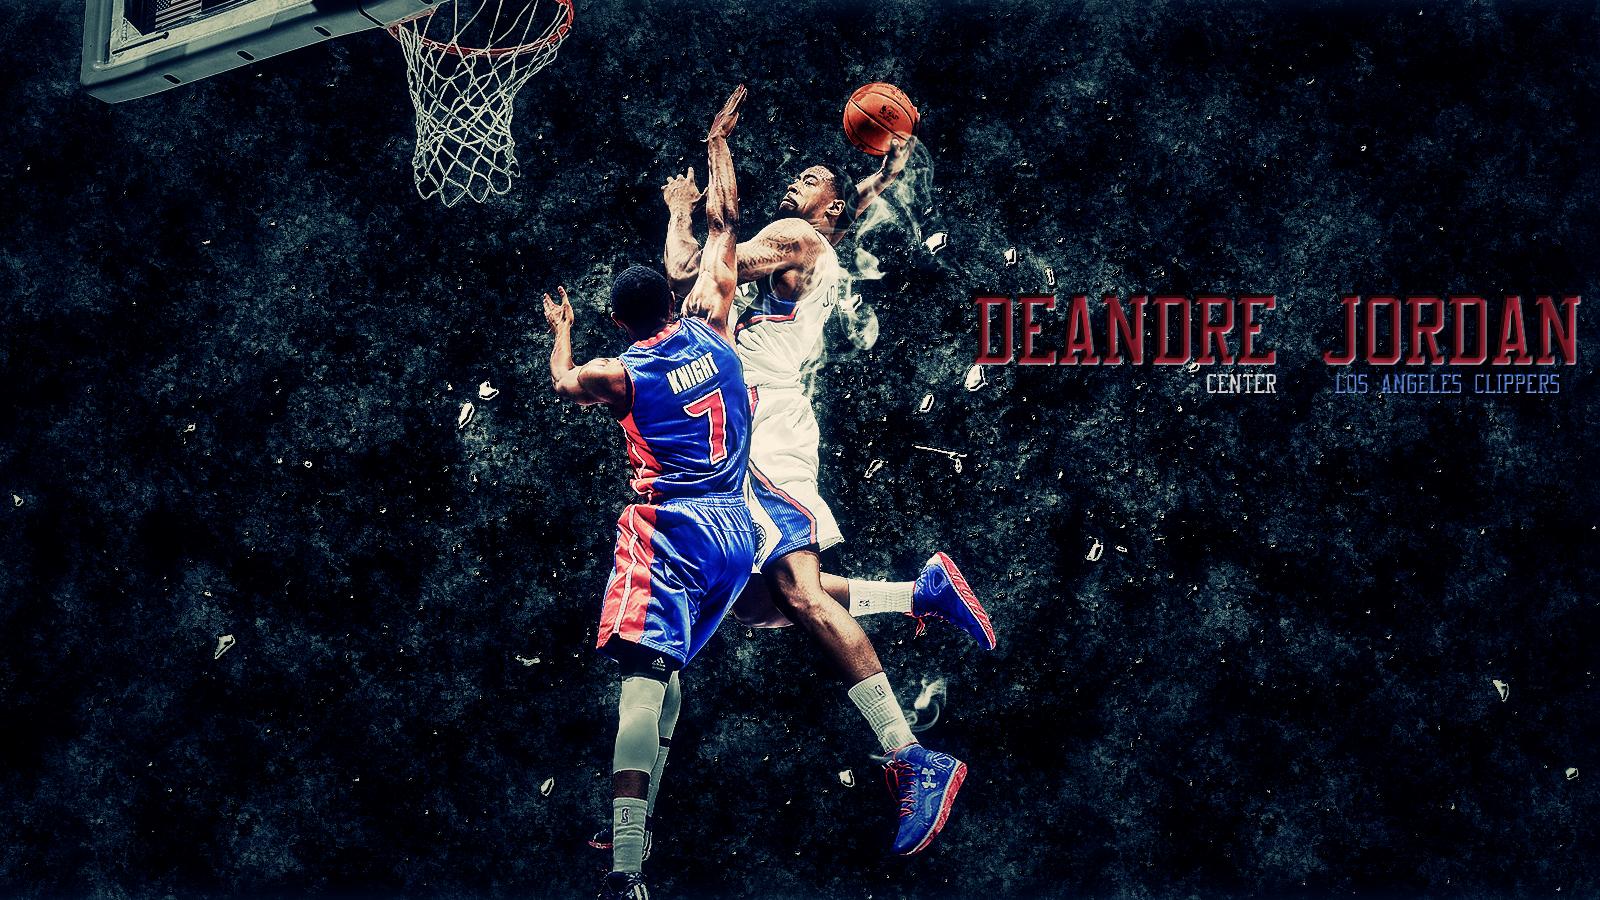 DeAndre Jordan Wallpapers High Resolution and Quality Download